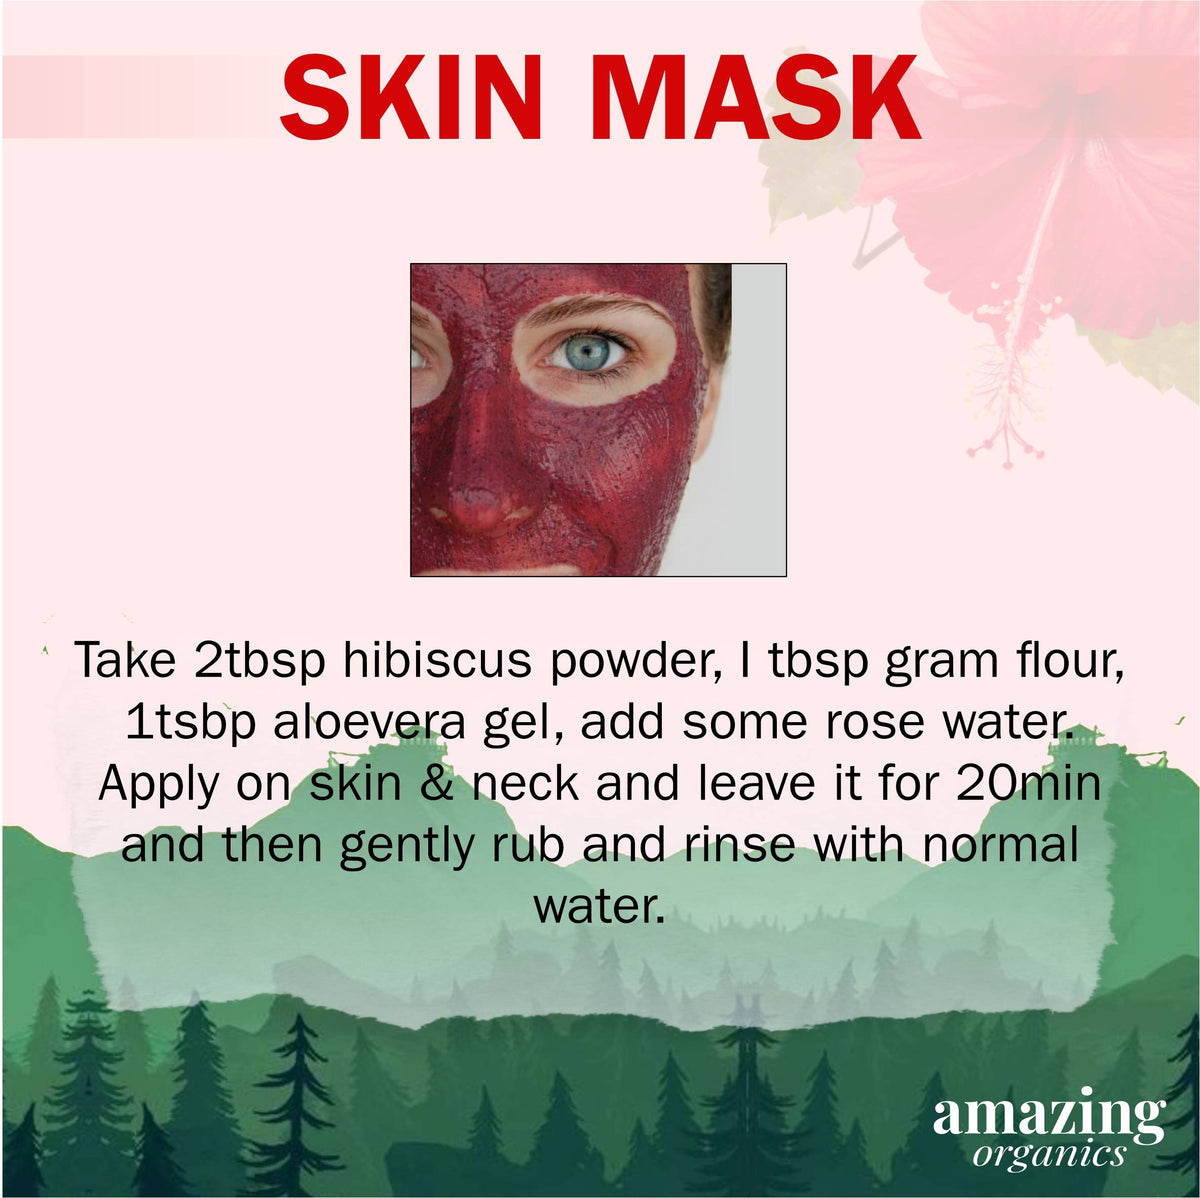 Hibiscus Powder for Hair and Skin Care